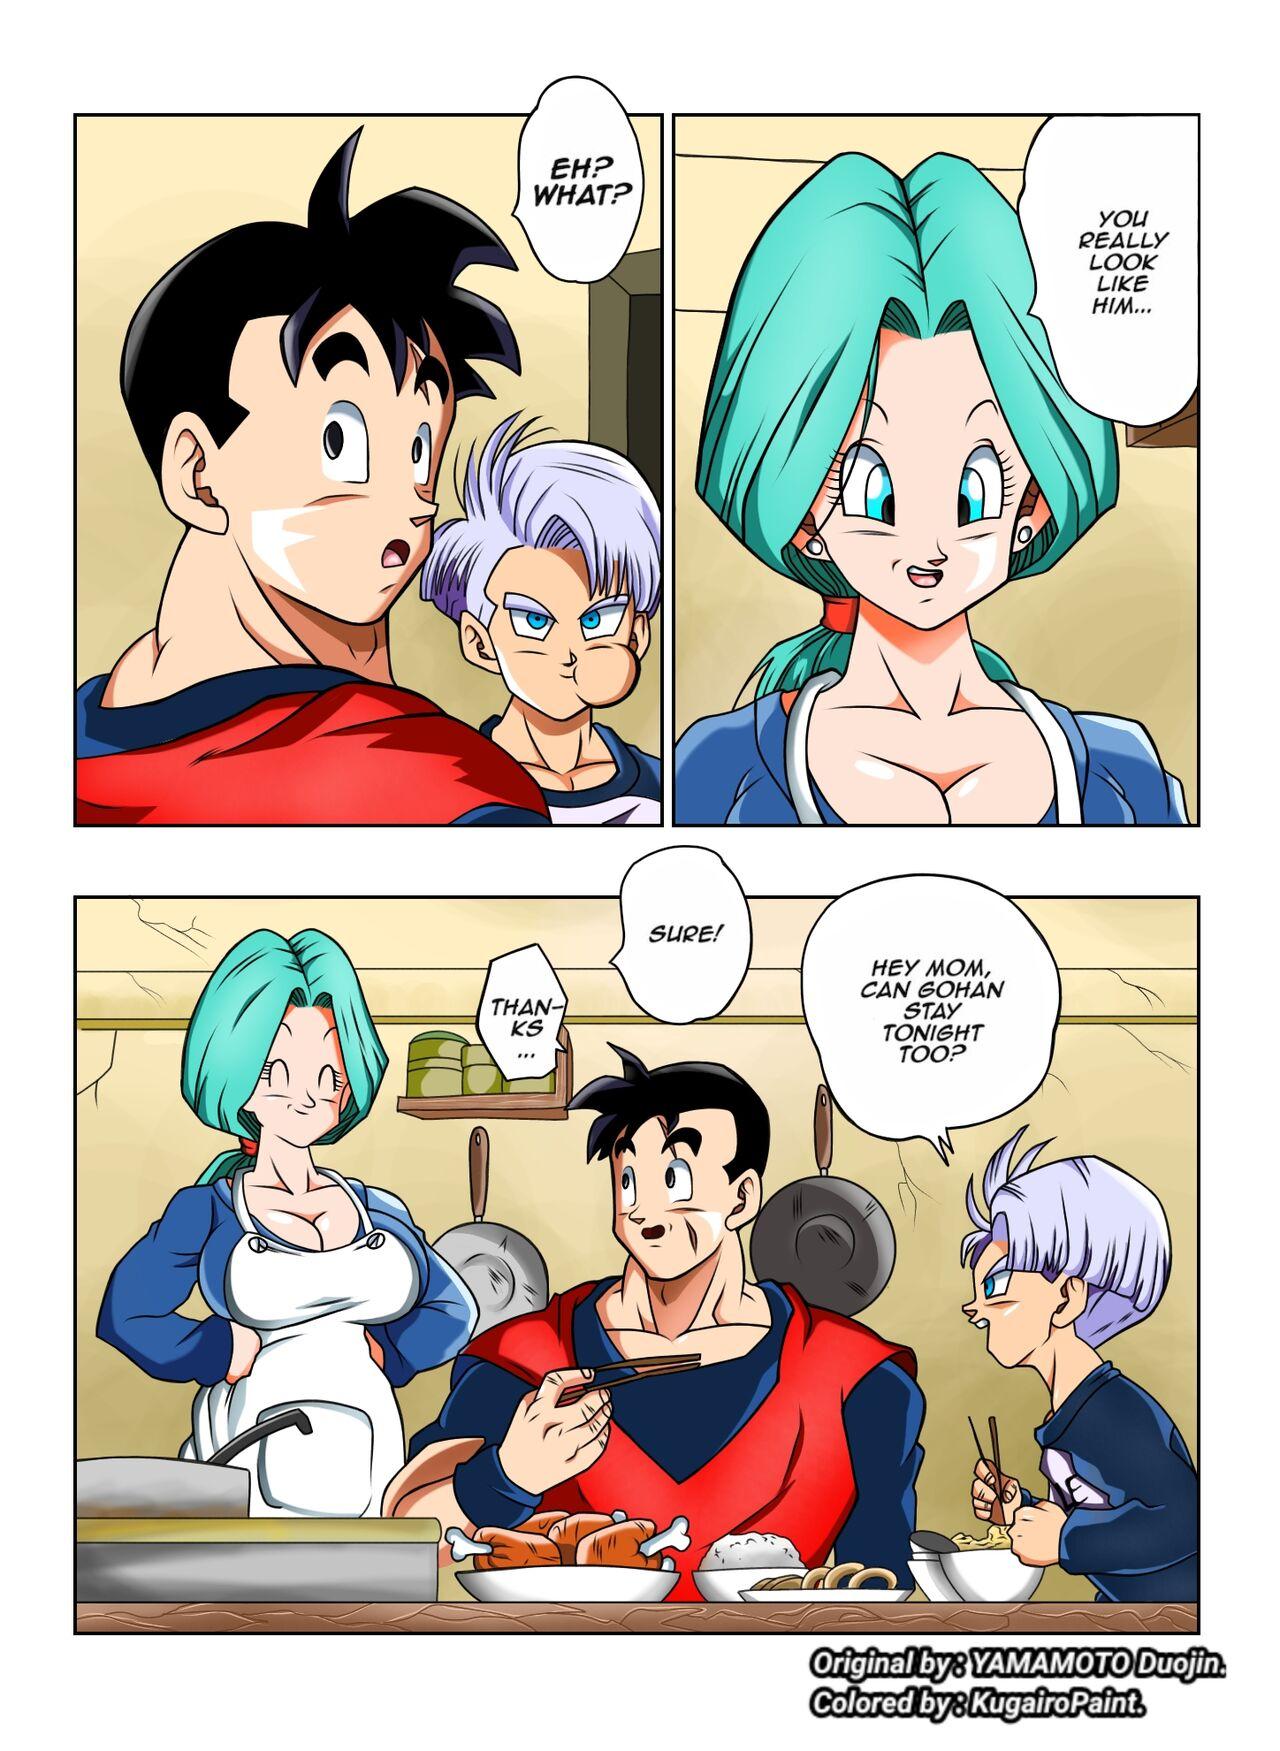 Boquete Lots of Sex in this Future!! - Dragon ball z Watersports - Page 3